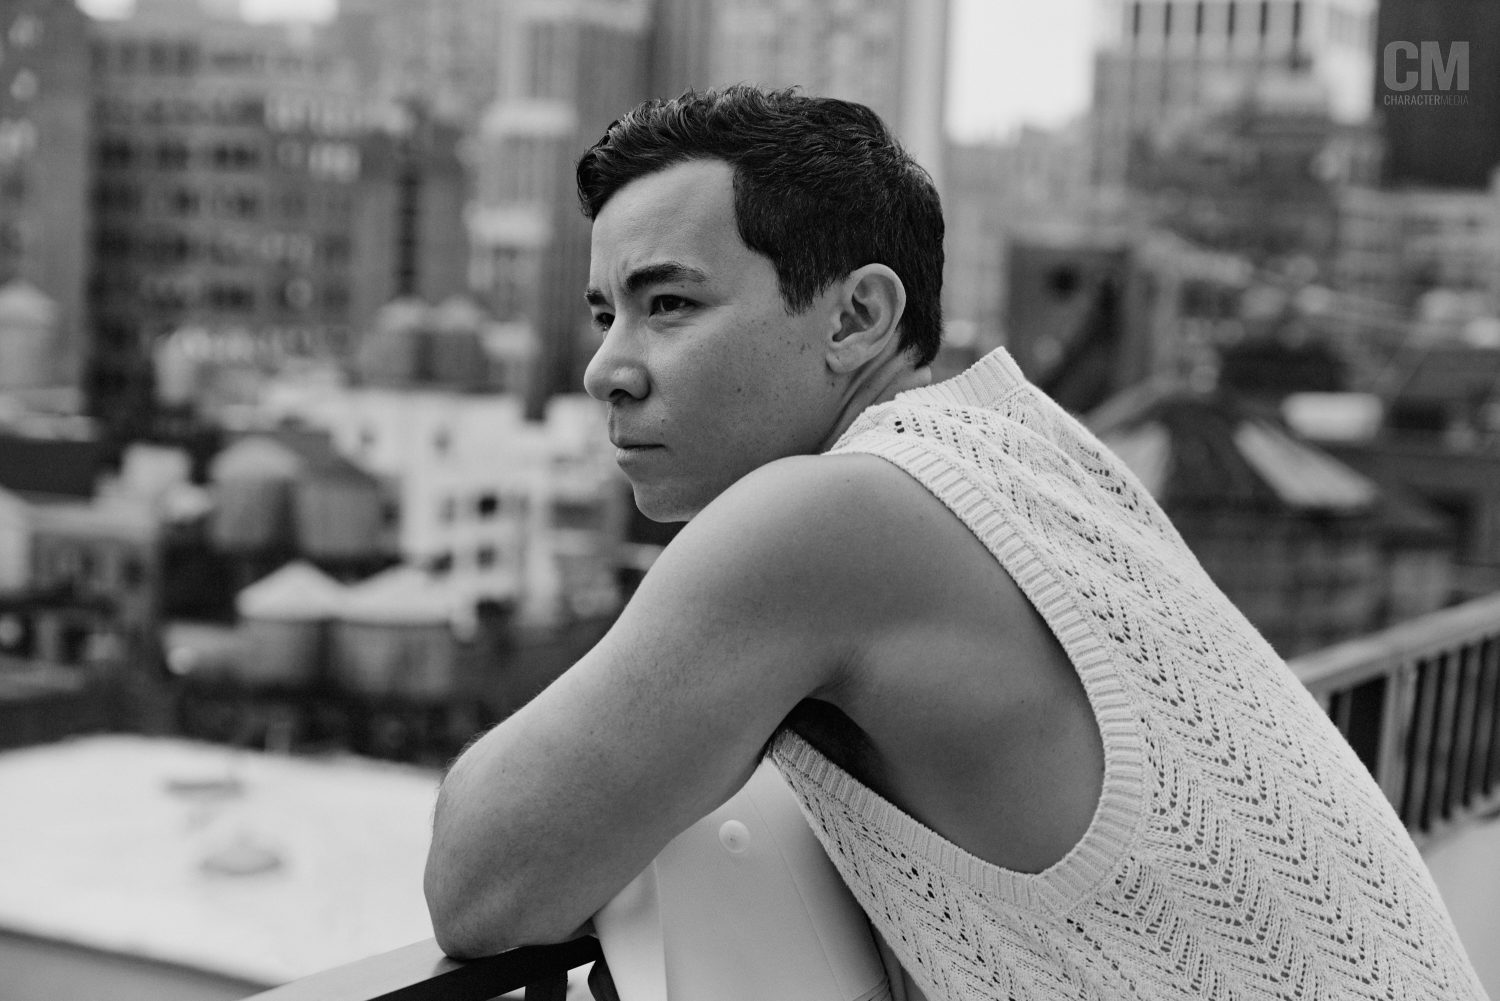 A photo of Conrad Ricamora posing in front of the New York City skyline.